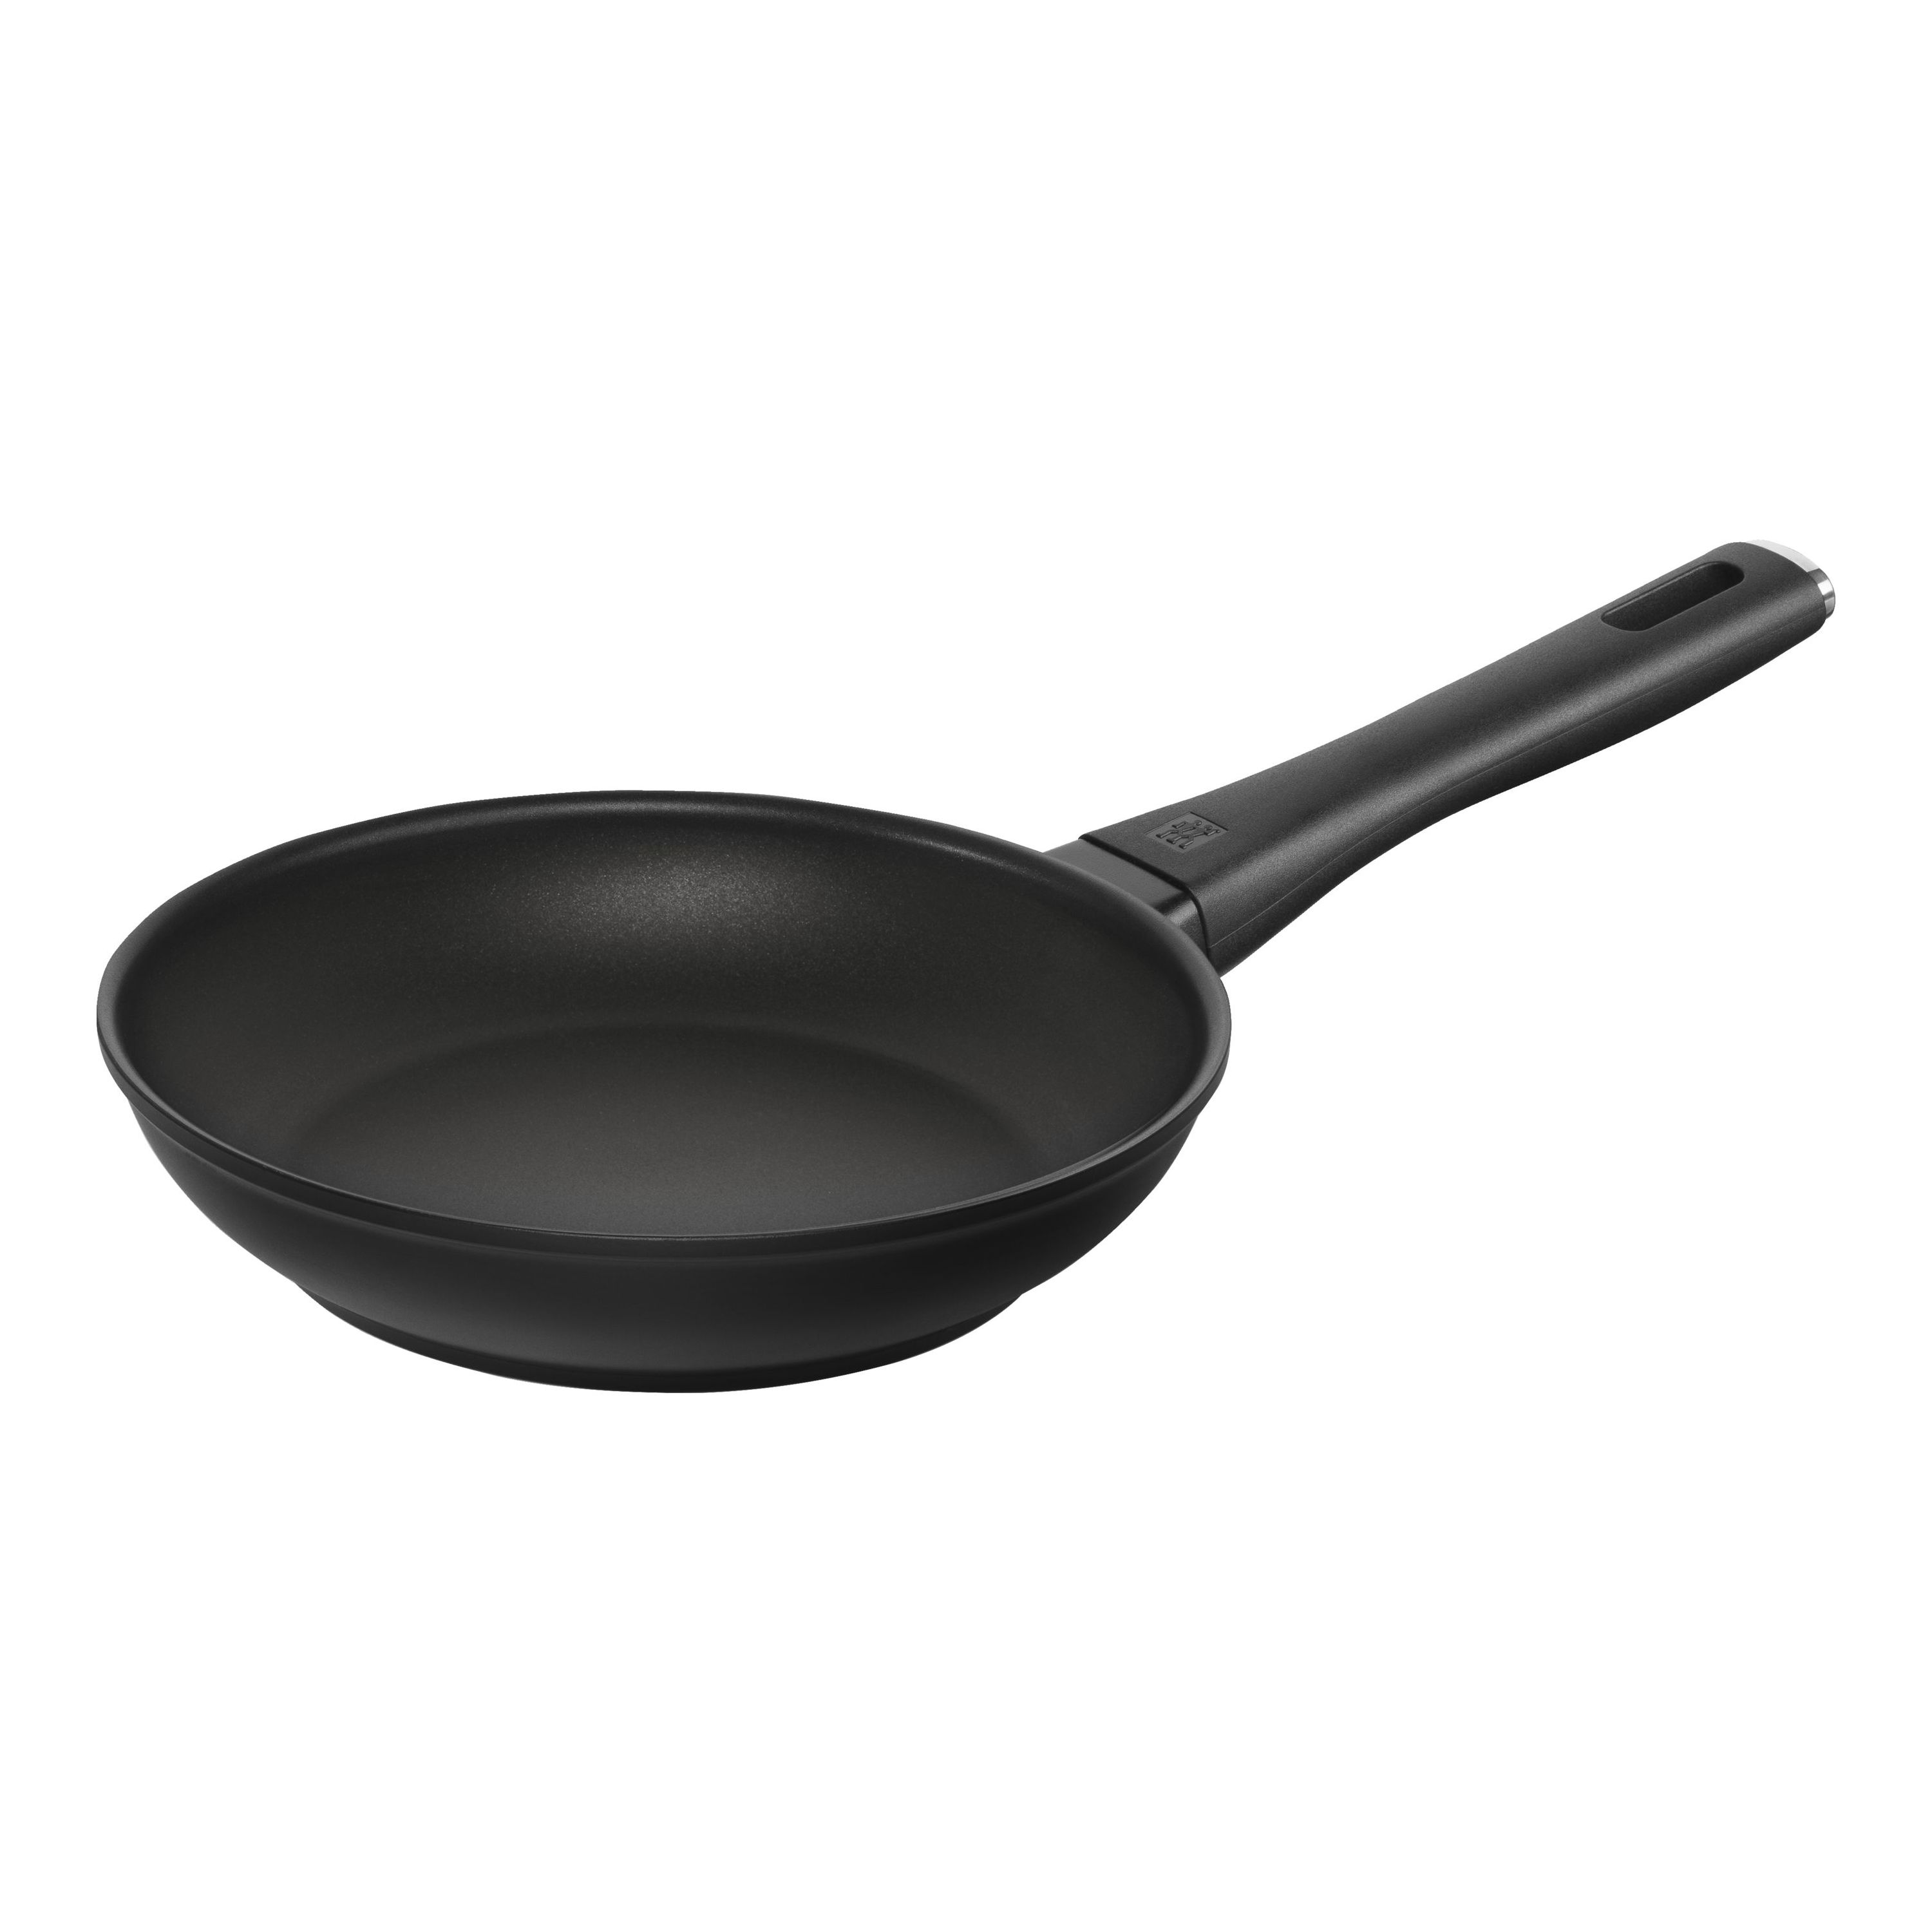 Demeyere AluPro 8-inch Aluminum Nonstick Fry Pan, 8-inch - Fry's Food Stores